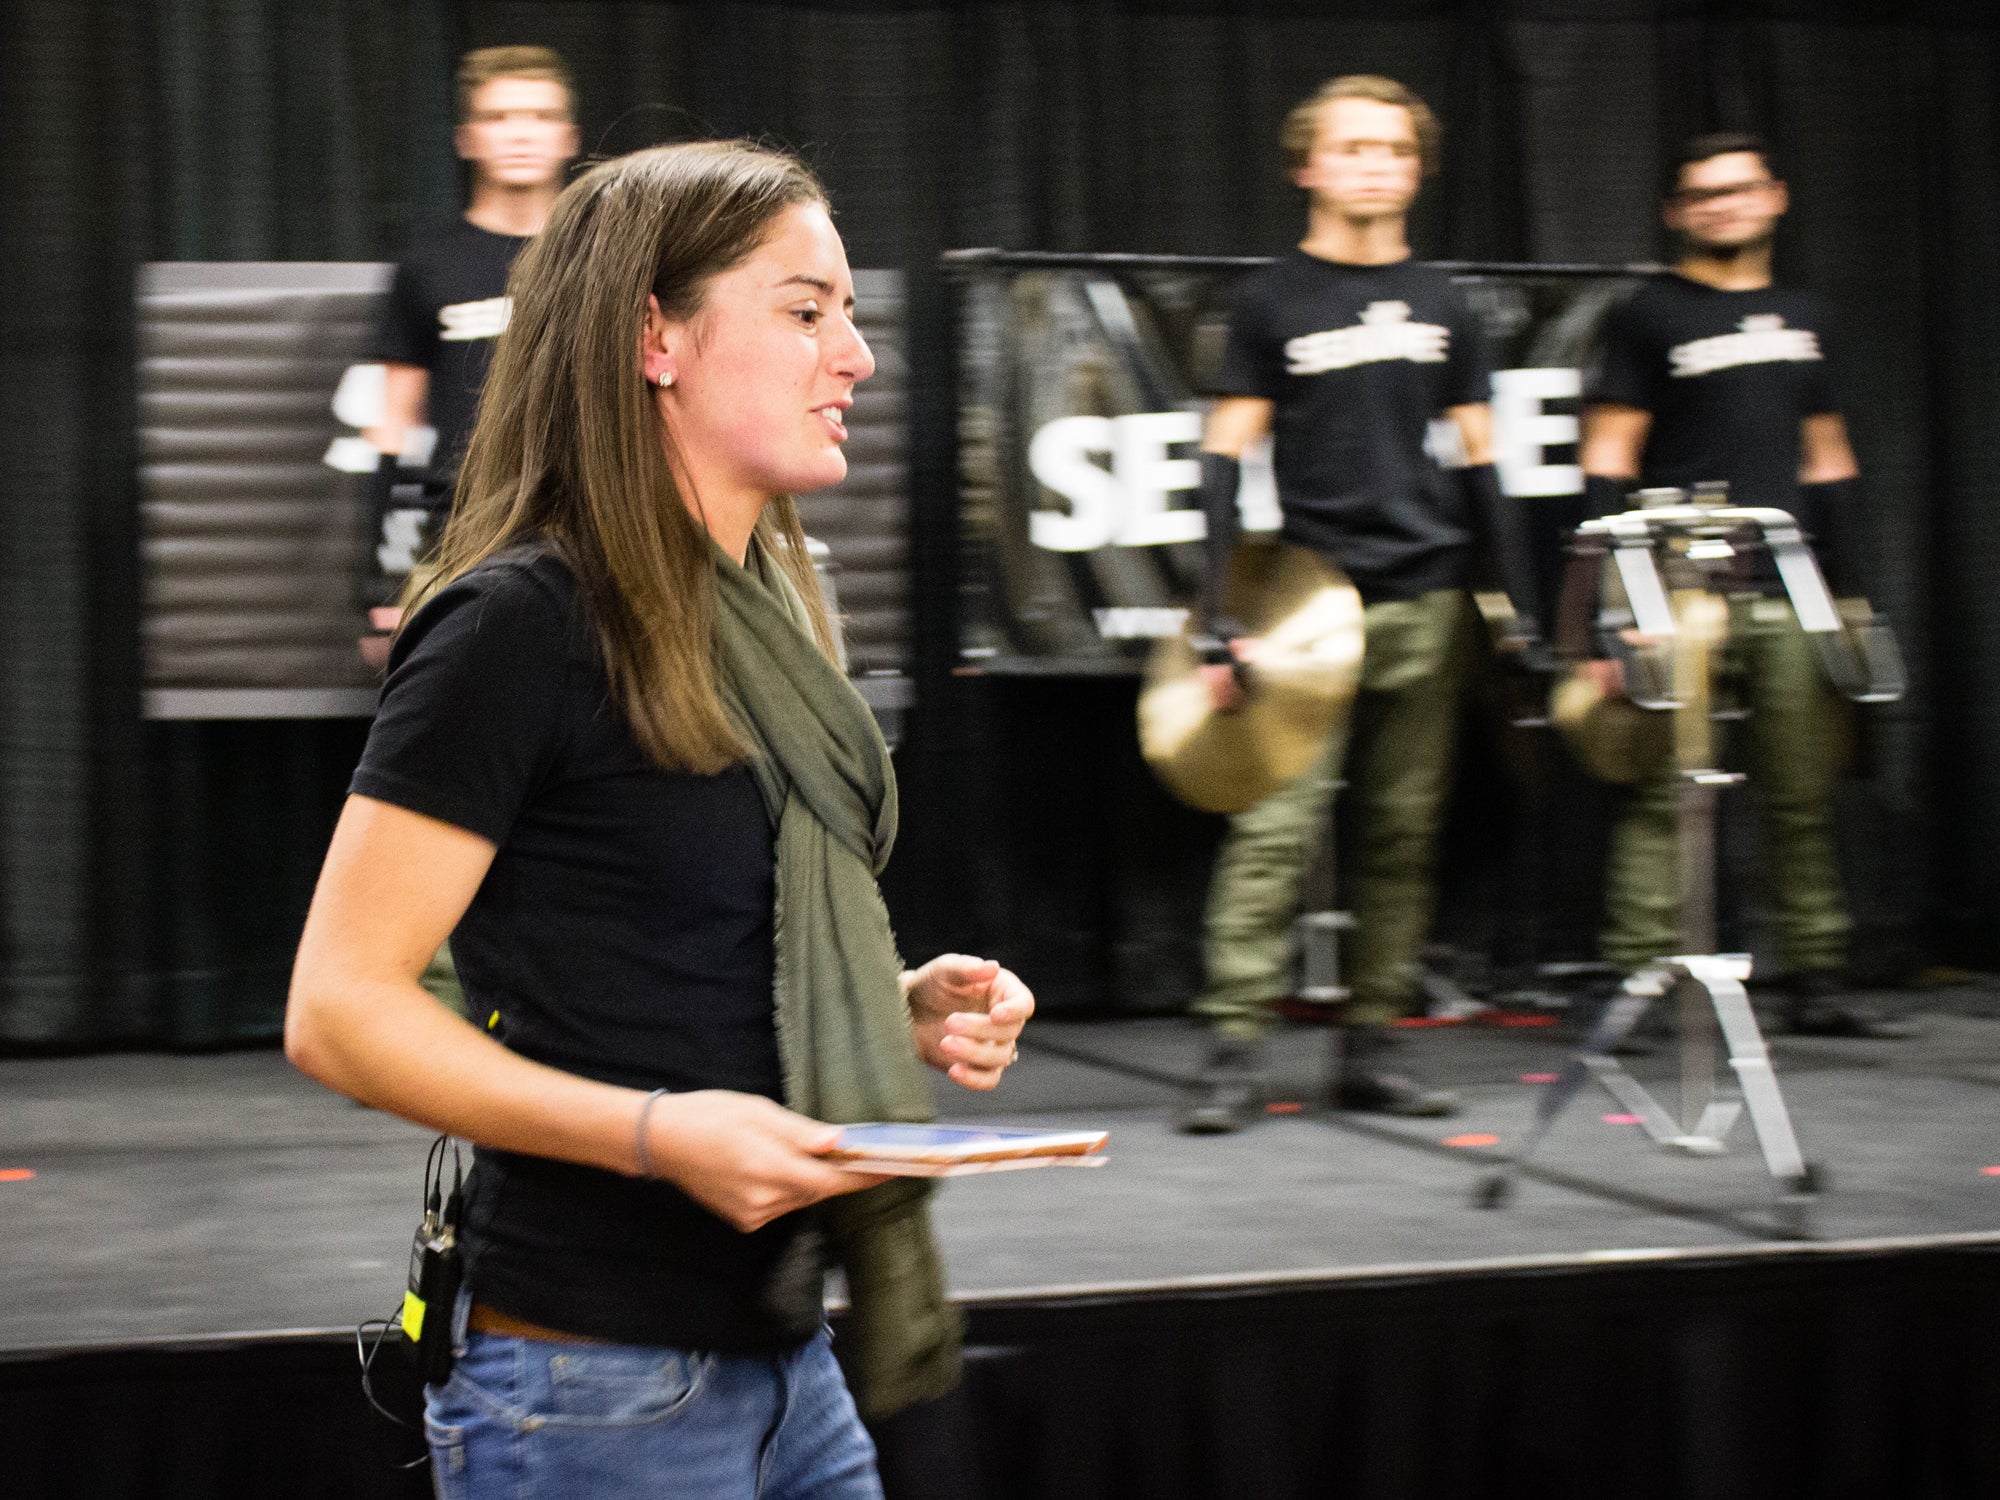 Rhythm X cymbal tech and Seavine CEO Chelsea Levine giving a cymbal clinic